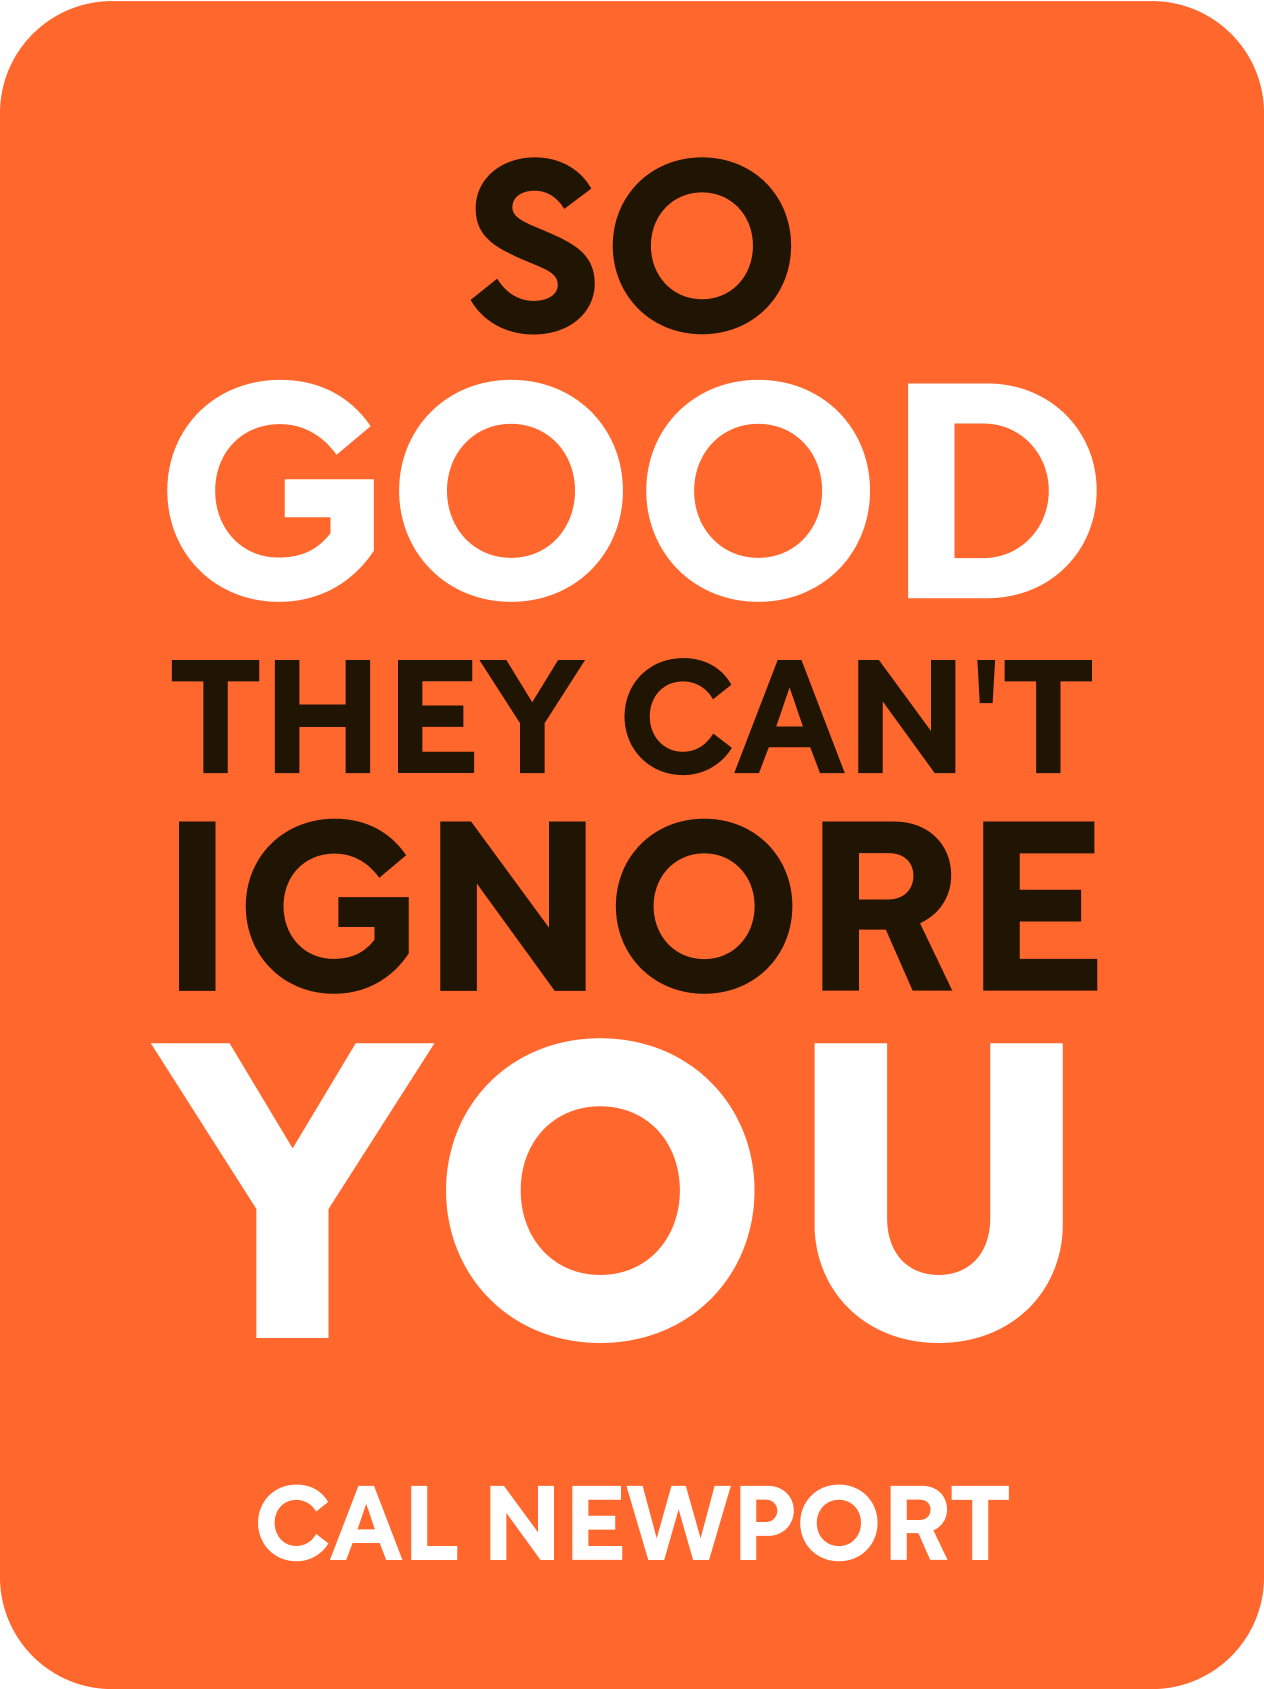 So Good They Can’t Ignore You – Cal Newport